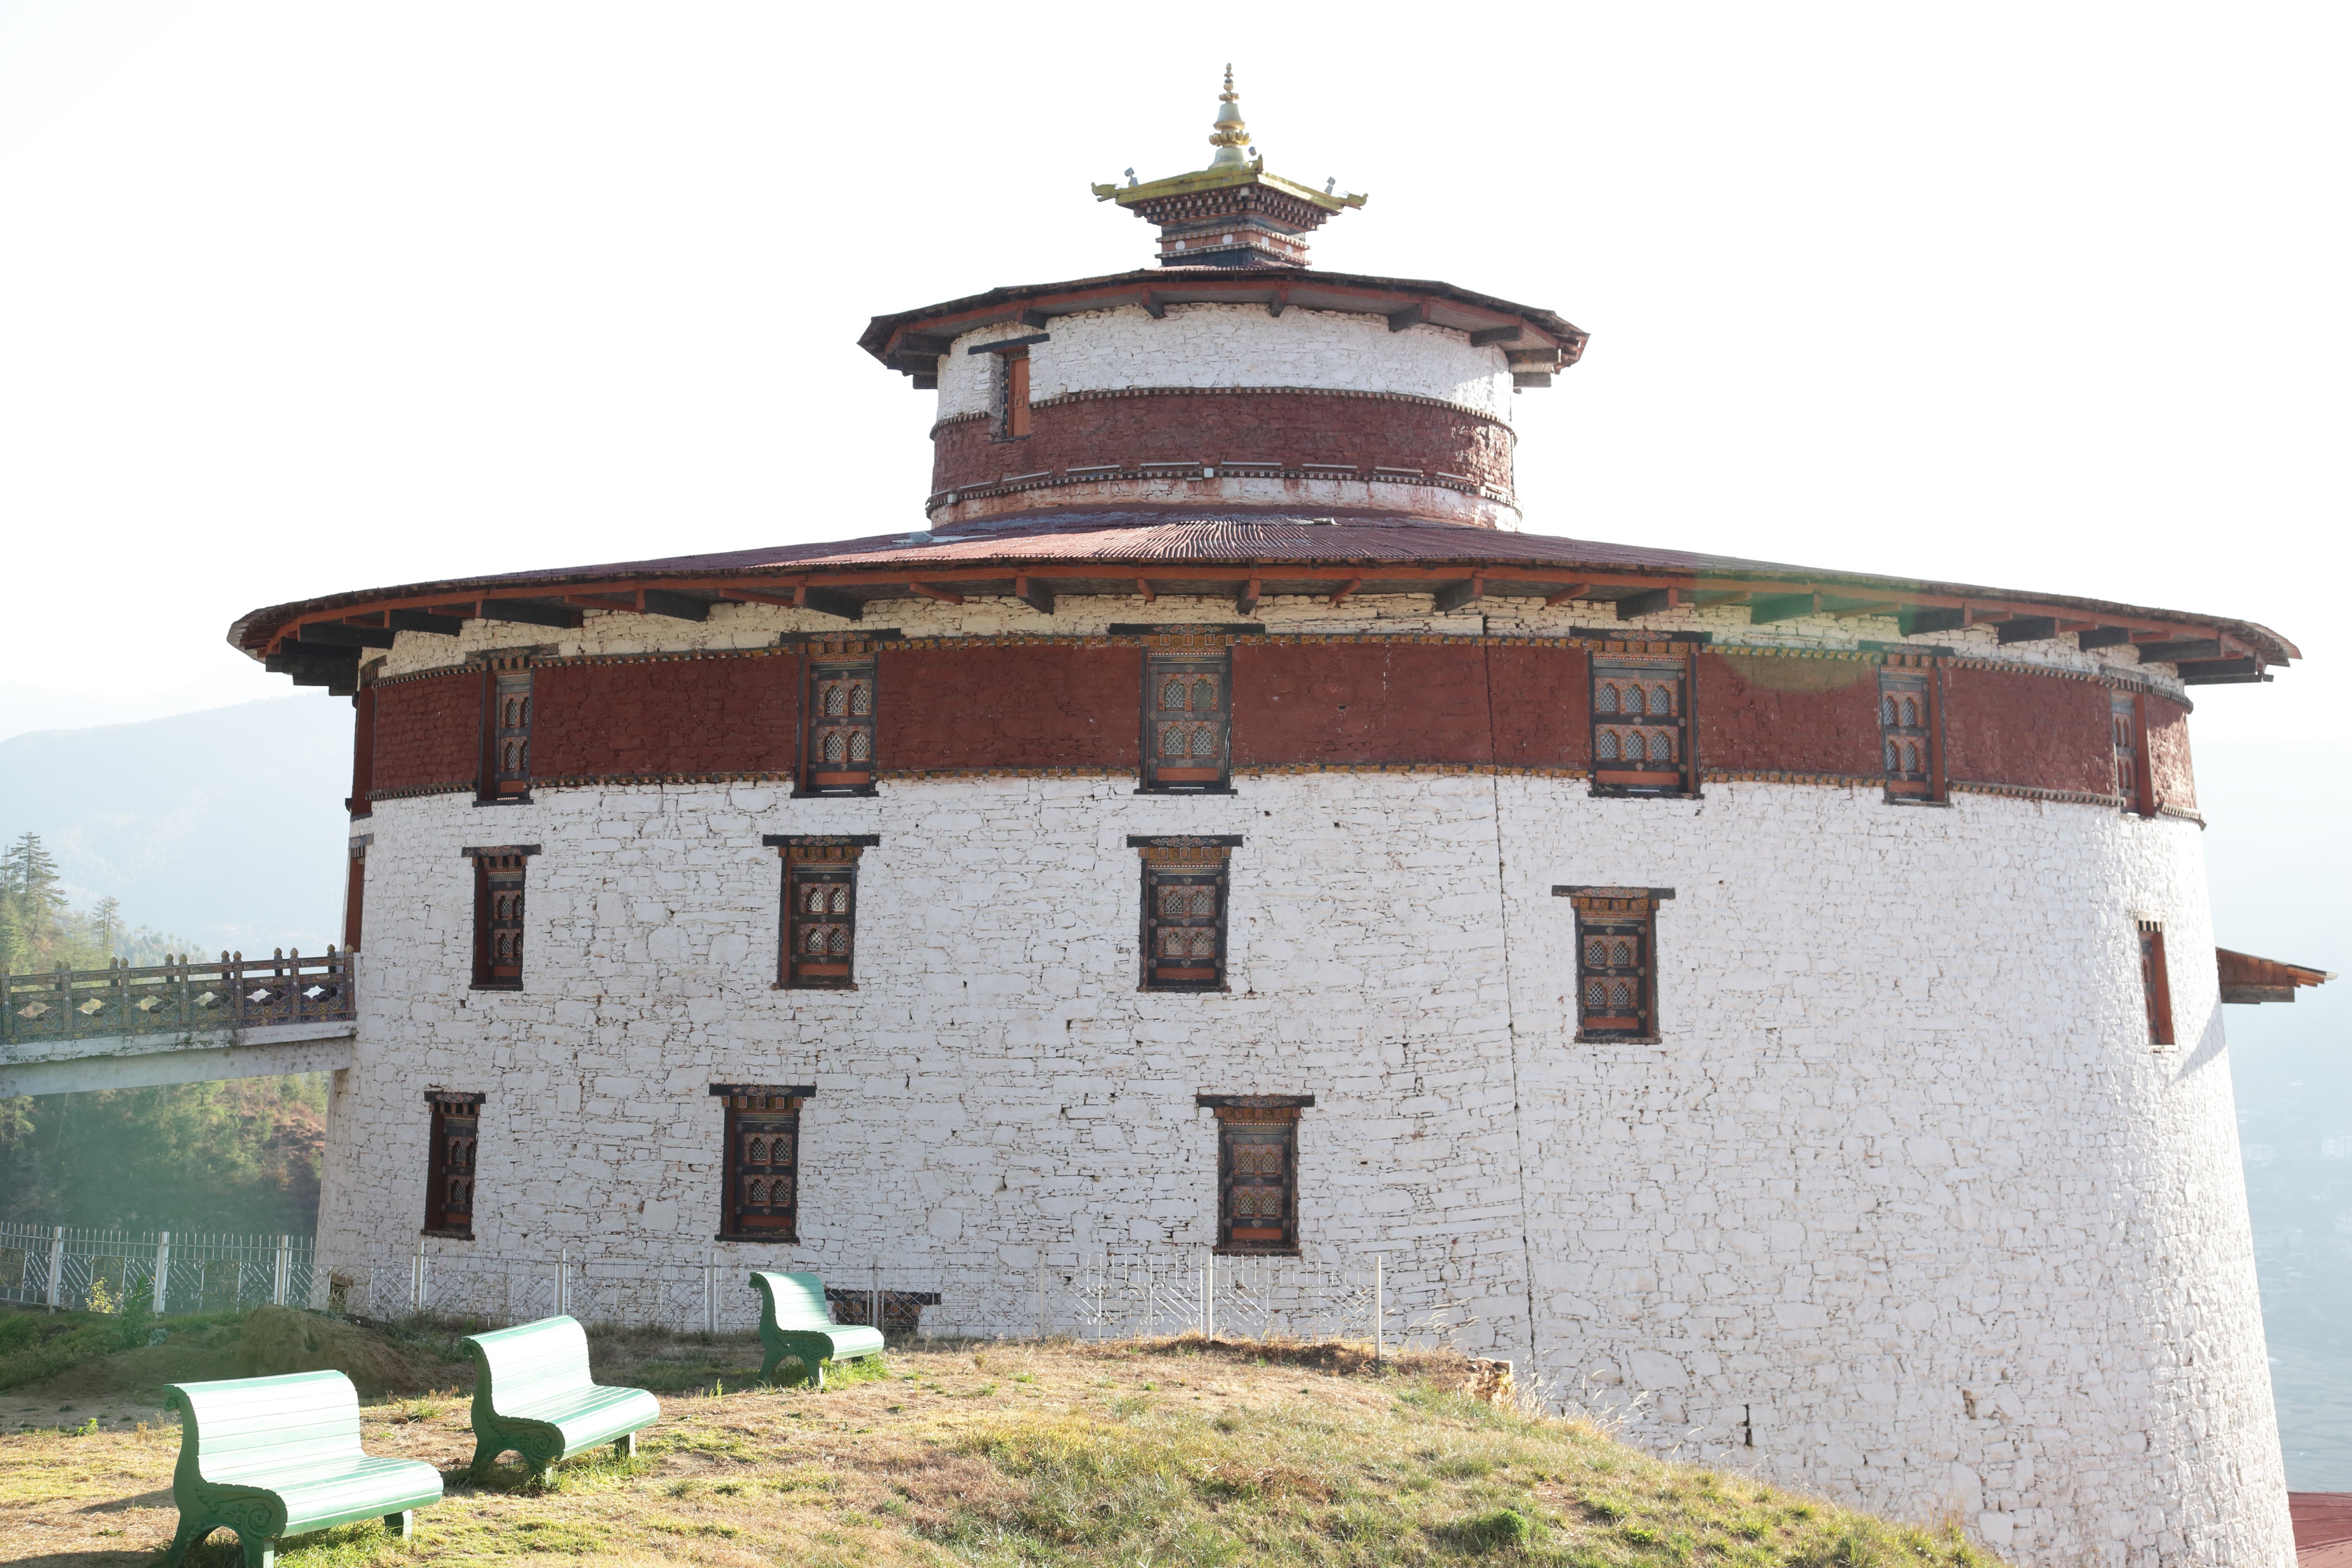 The National Museum of Bhutan recounts the history of the country from the Stone Age to the present